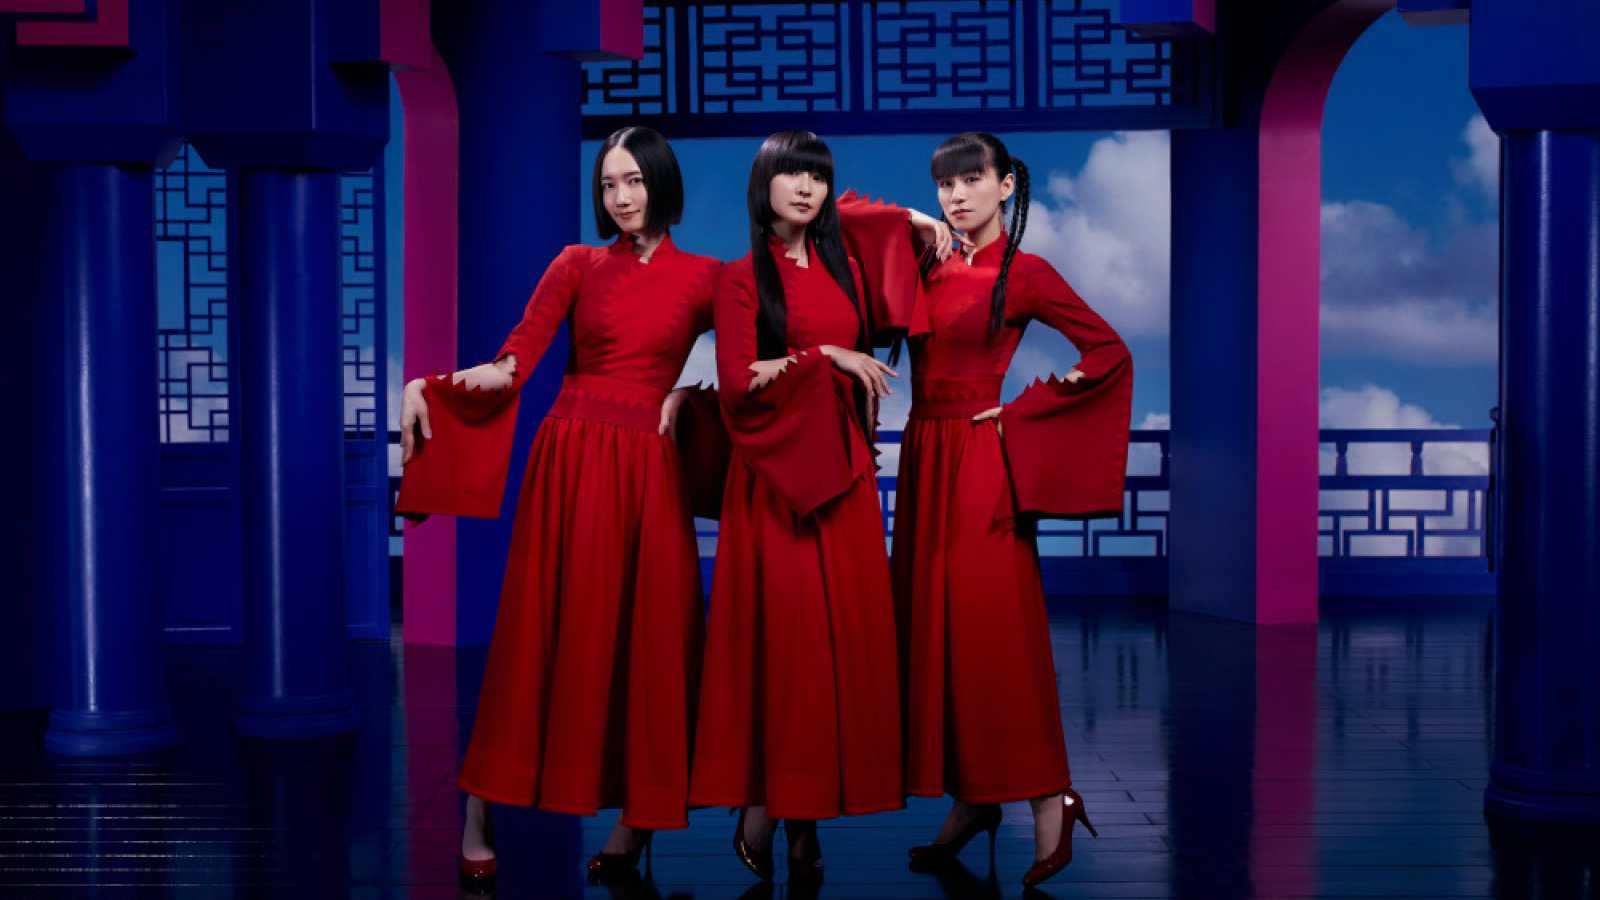 Nowy album Perfume © Perfume. All rights reserved.